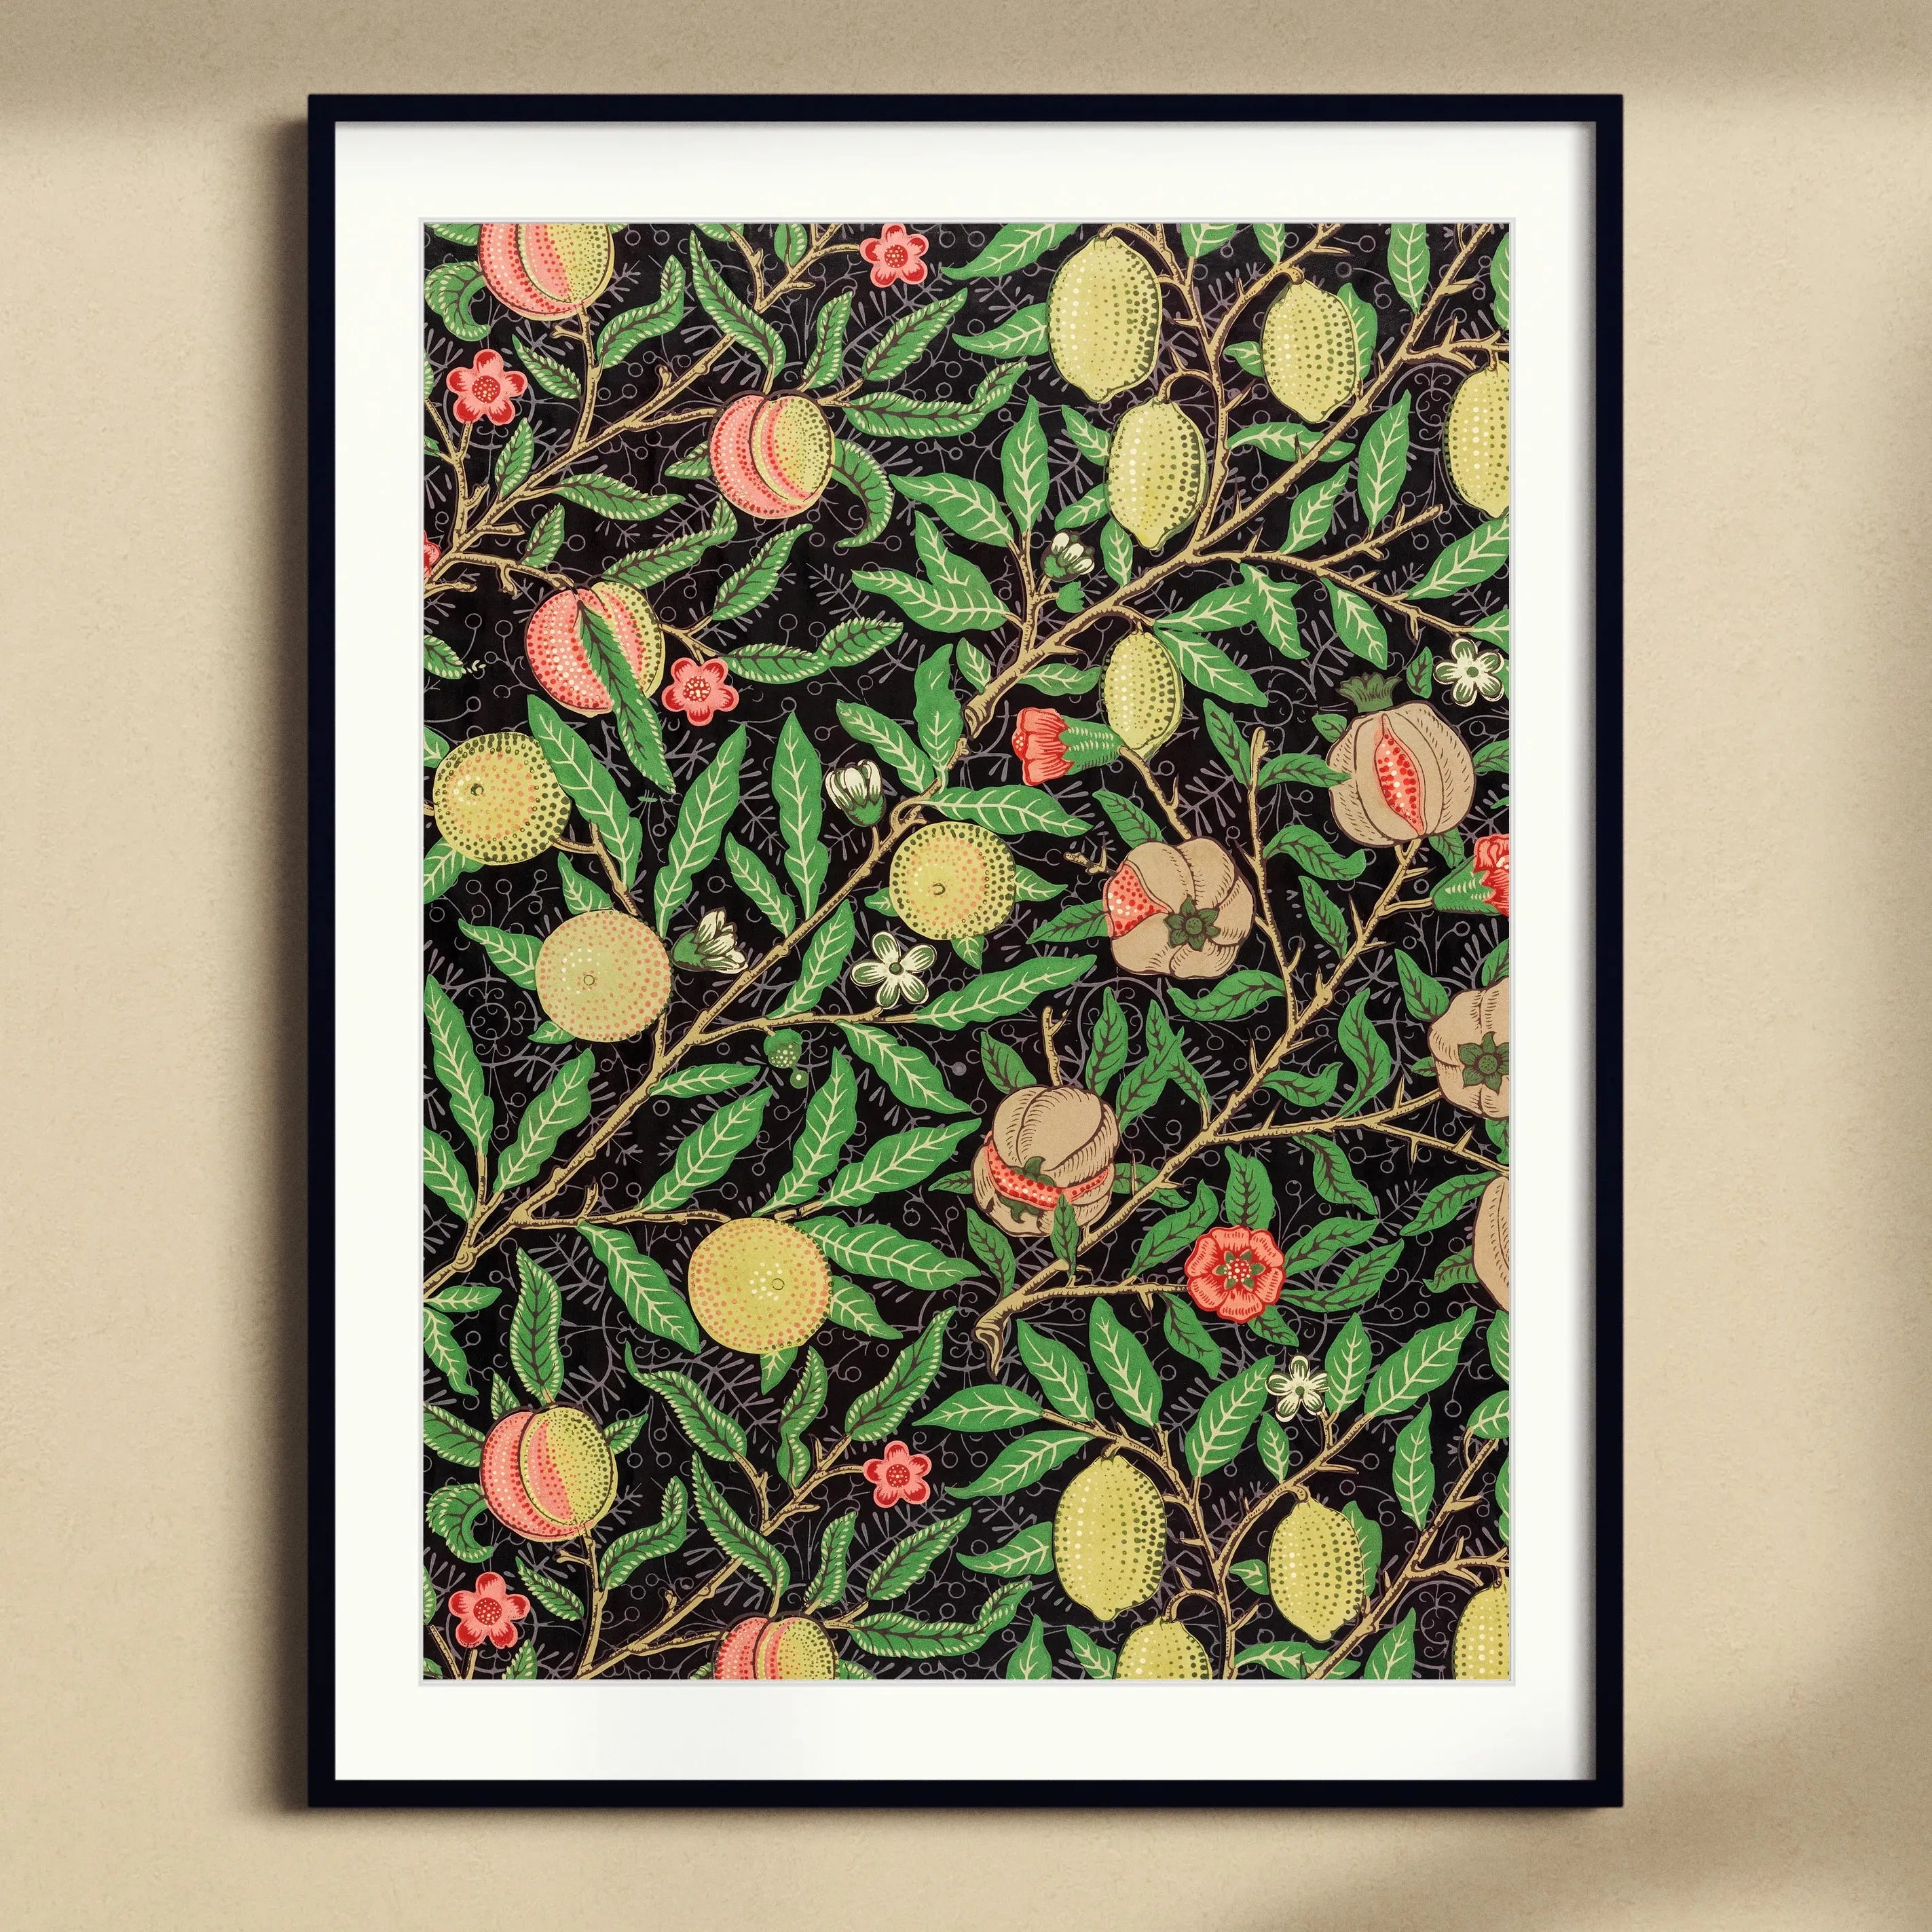 Four Fruits Too - William Morris Framed & Mounted Print - Posters Prints & Visual Artwork - Aesthetic Art